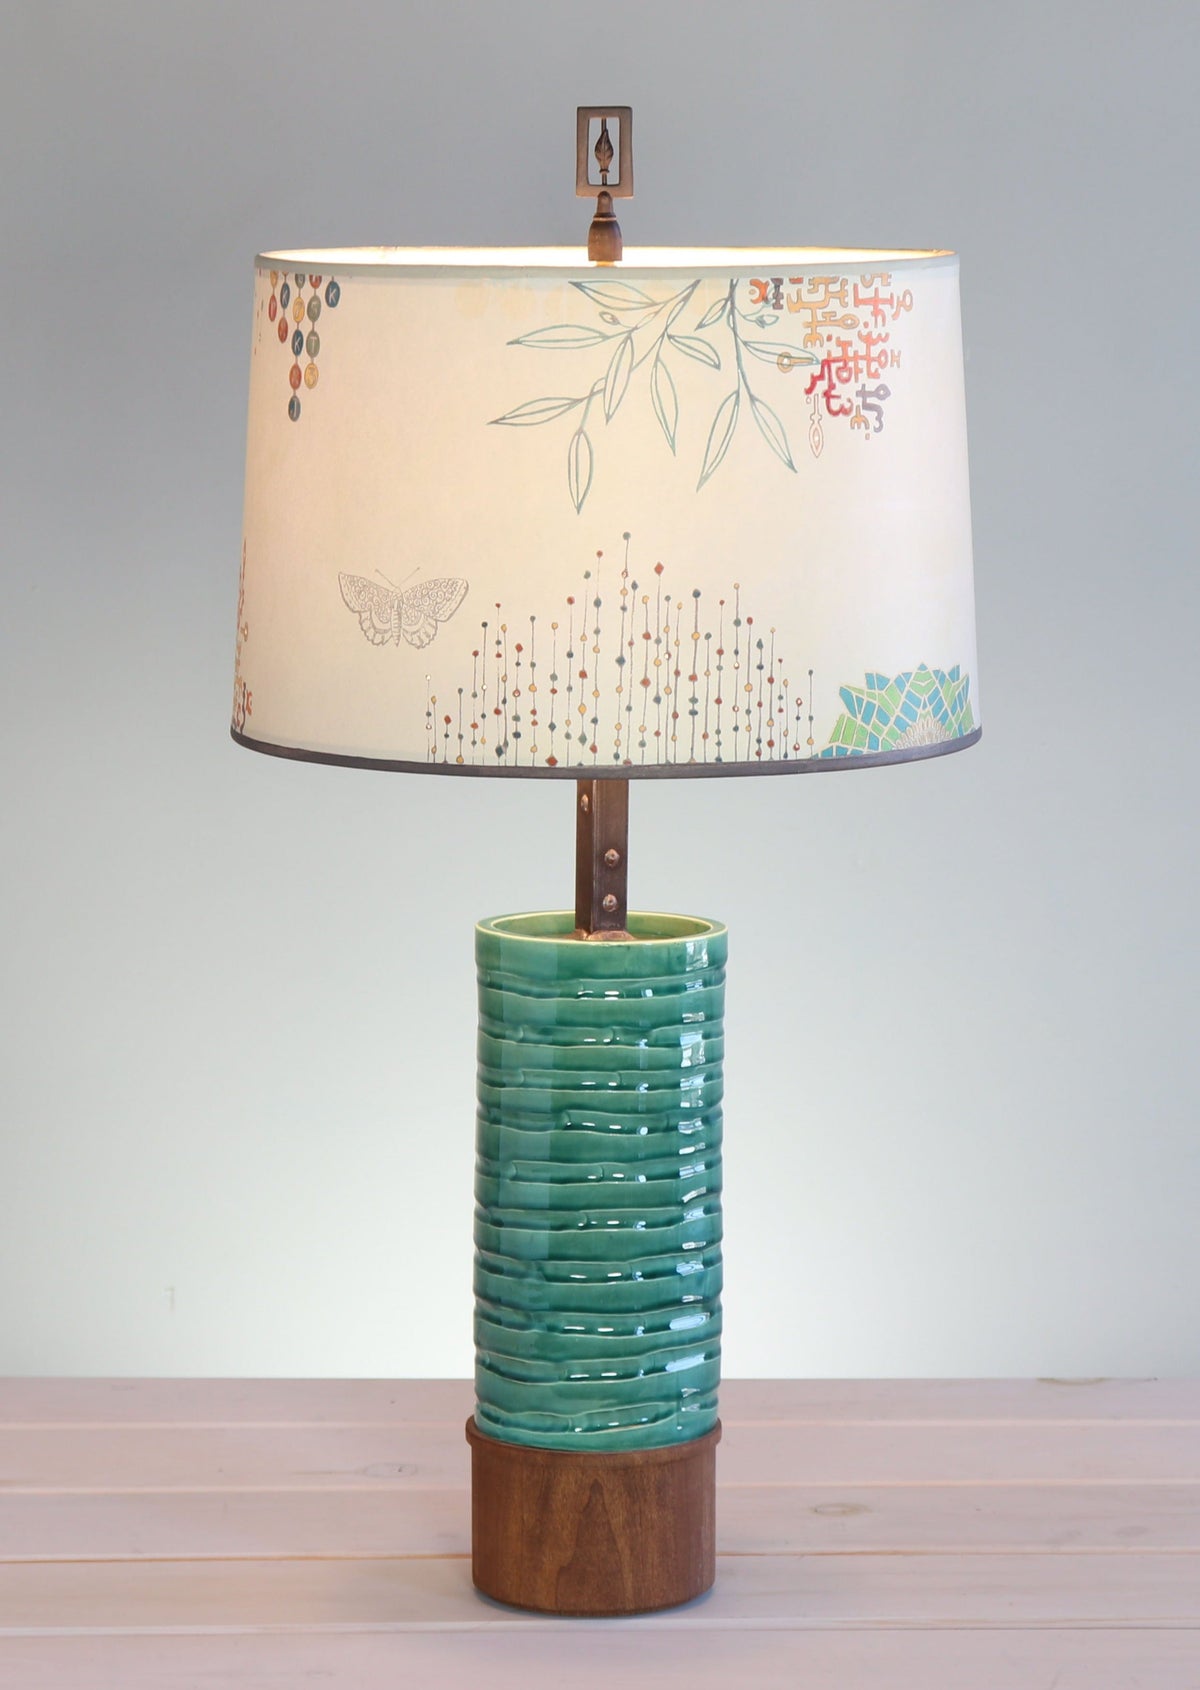 Janna Ugone &amp; Co Table Lamps Ceramic and Wood Table Lamp with Large Drum Shade in Ecru Journey